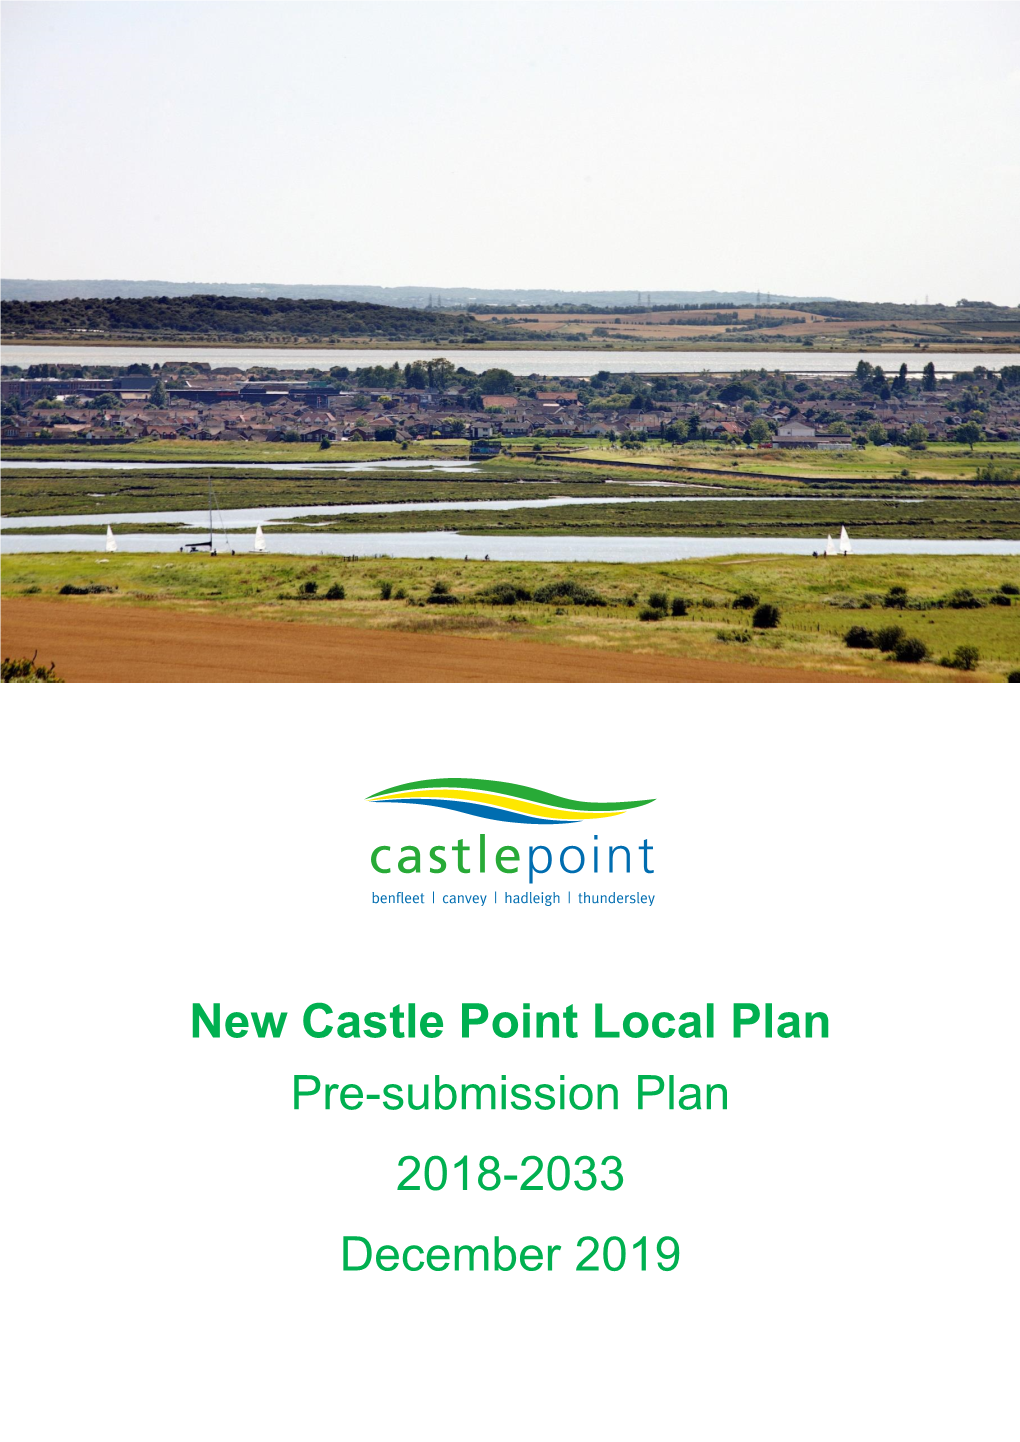 New Castle Point Local Plan Pre-Submission Plan 2018-2033 December 2019